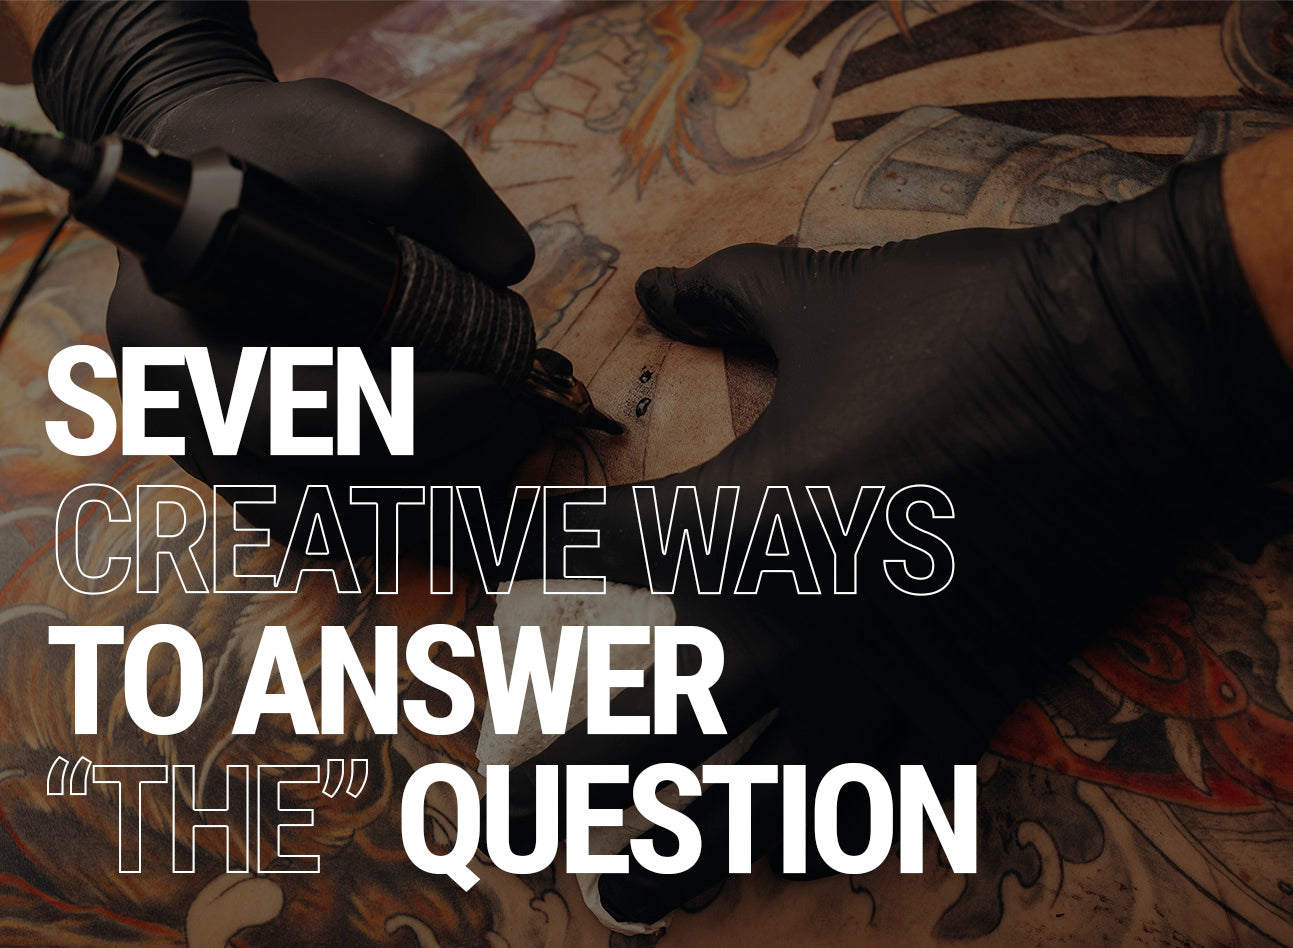 7 CREATIVE WAYS TO ANSWER "THE" QUESTION